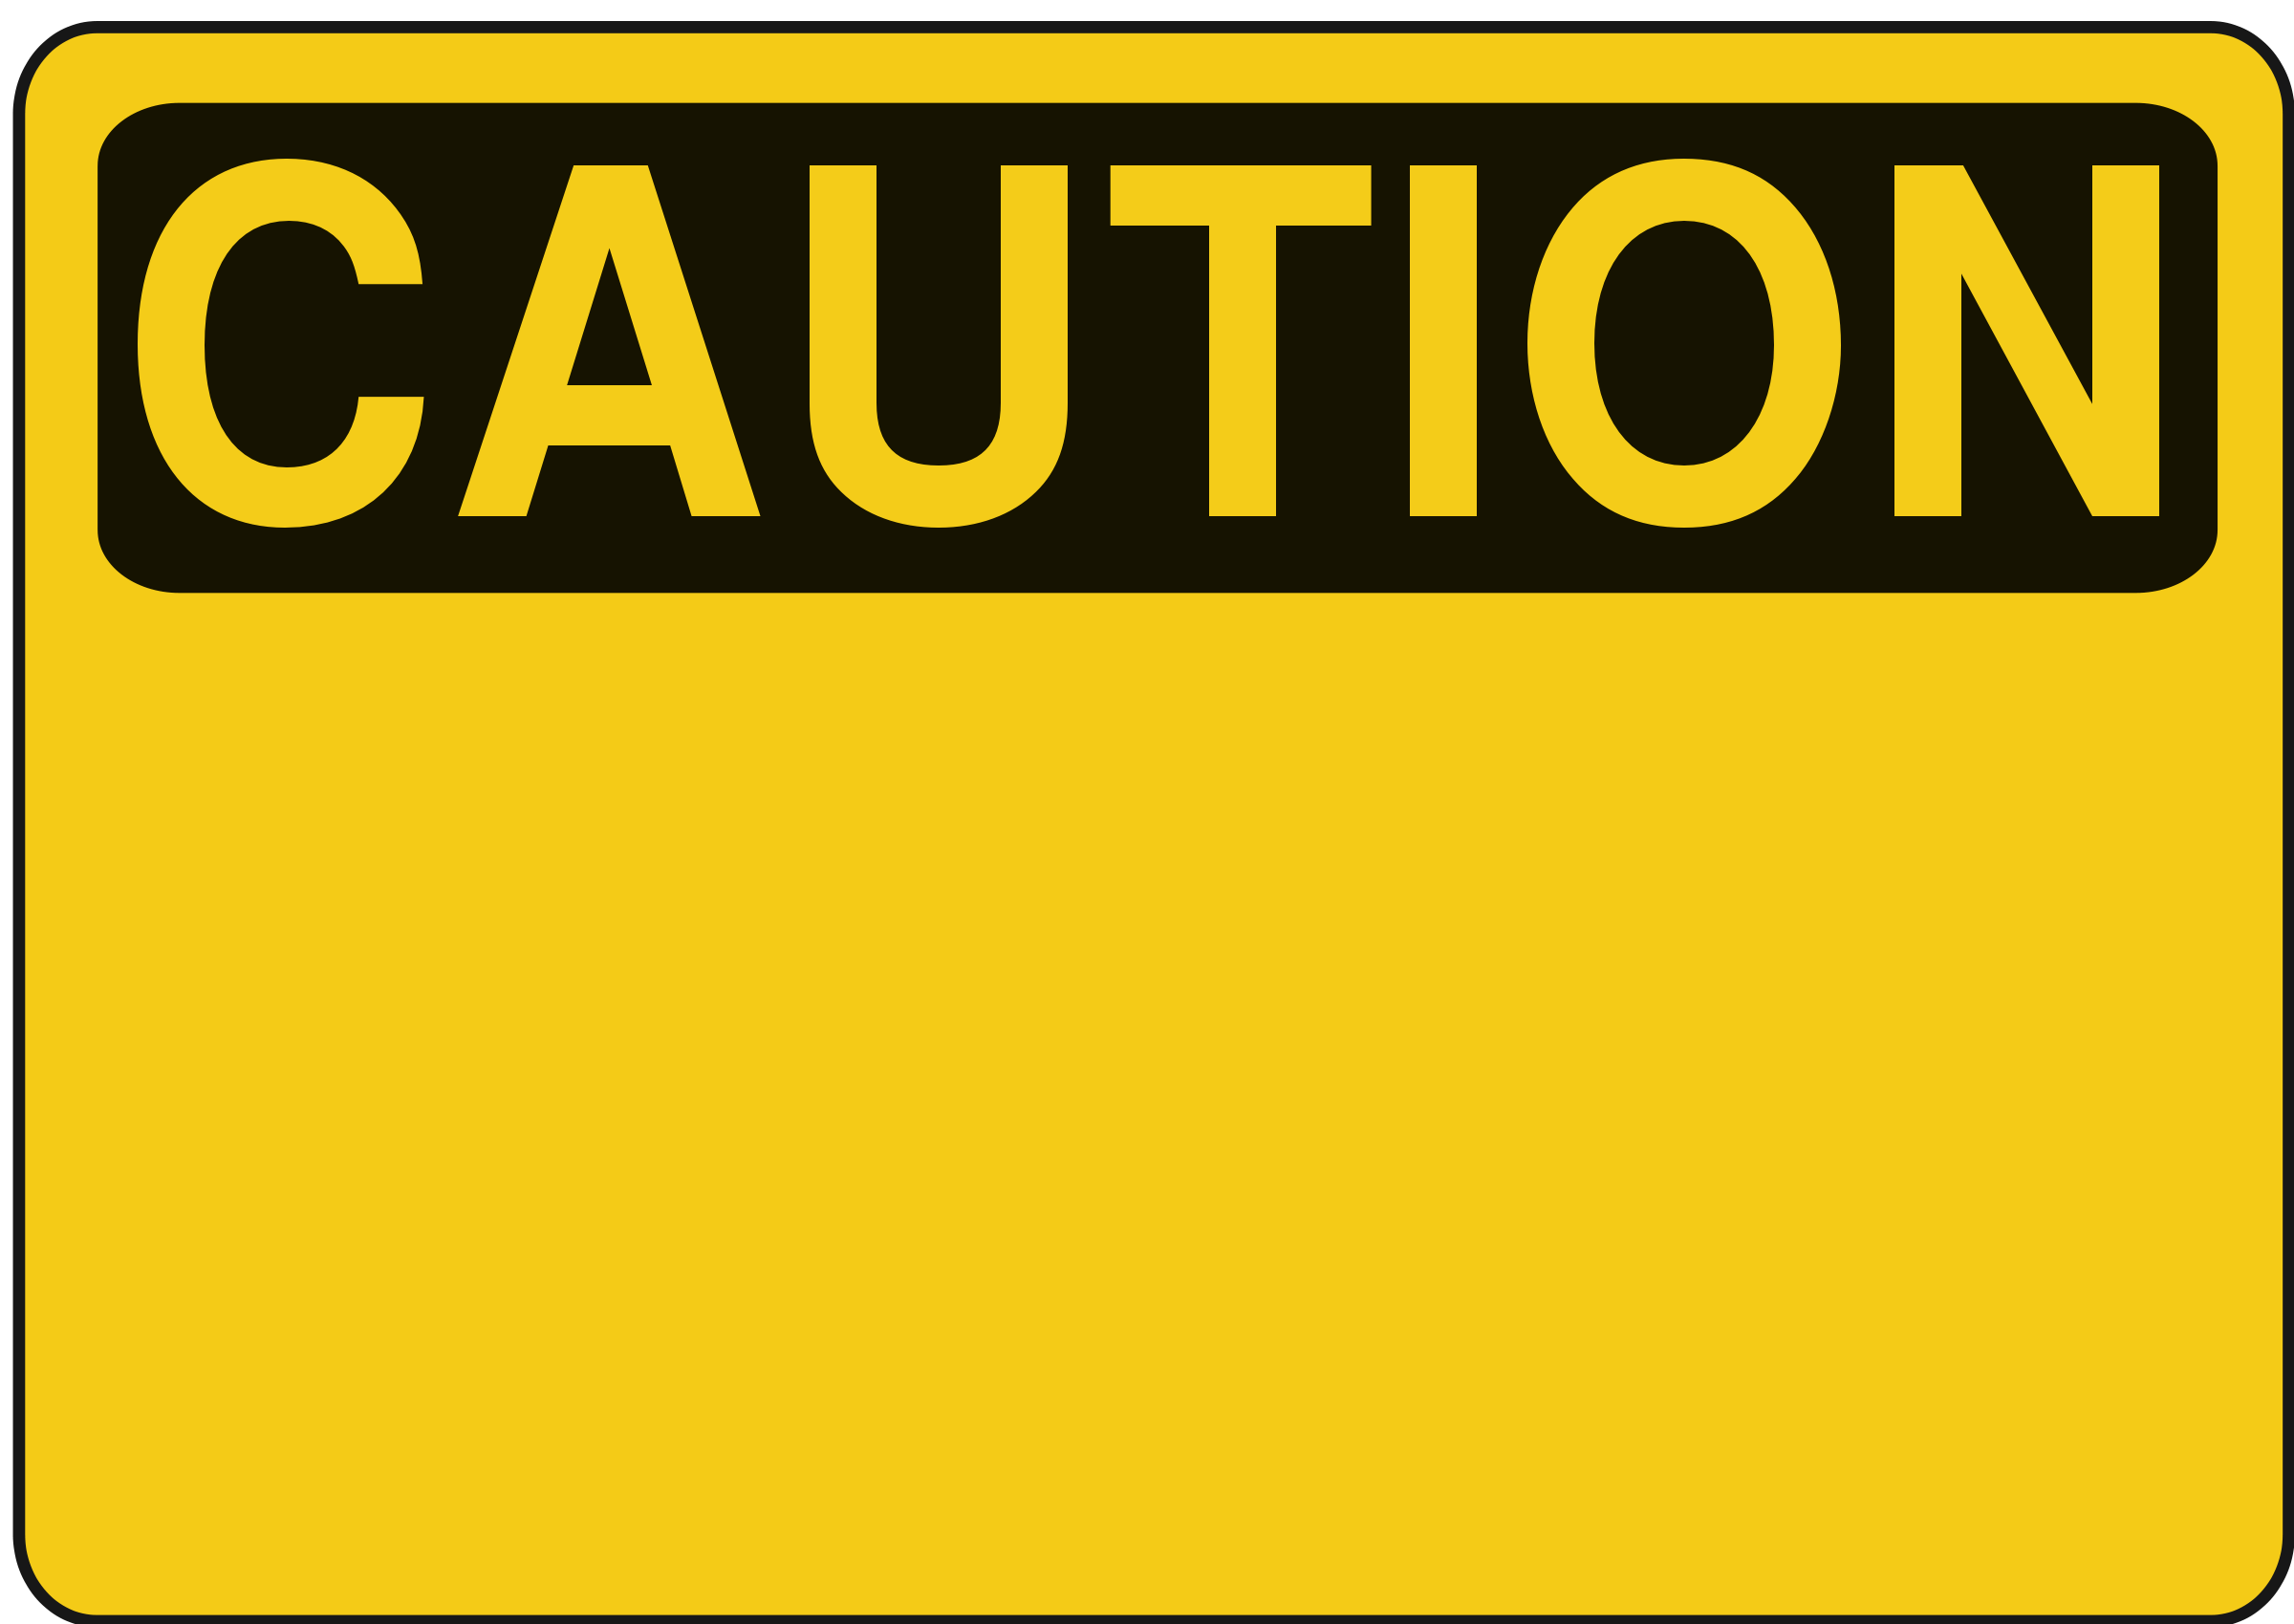 Blank Road Sign Clipart